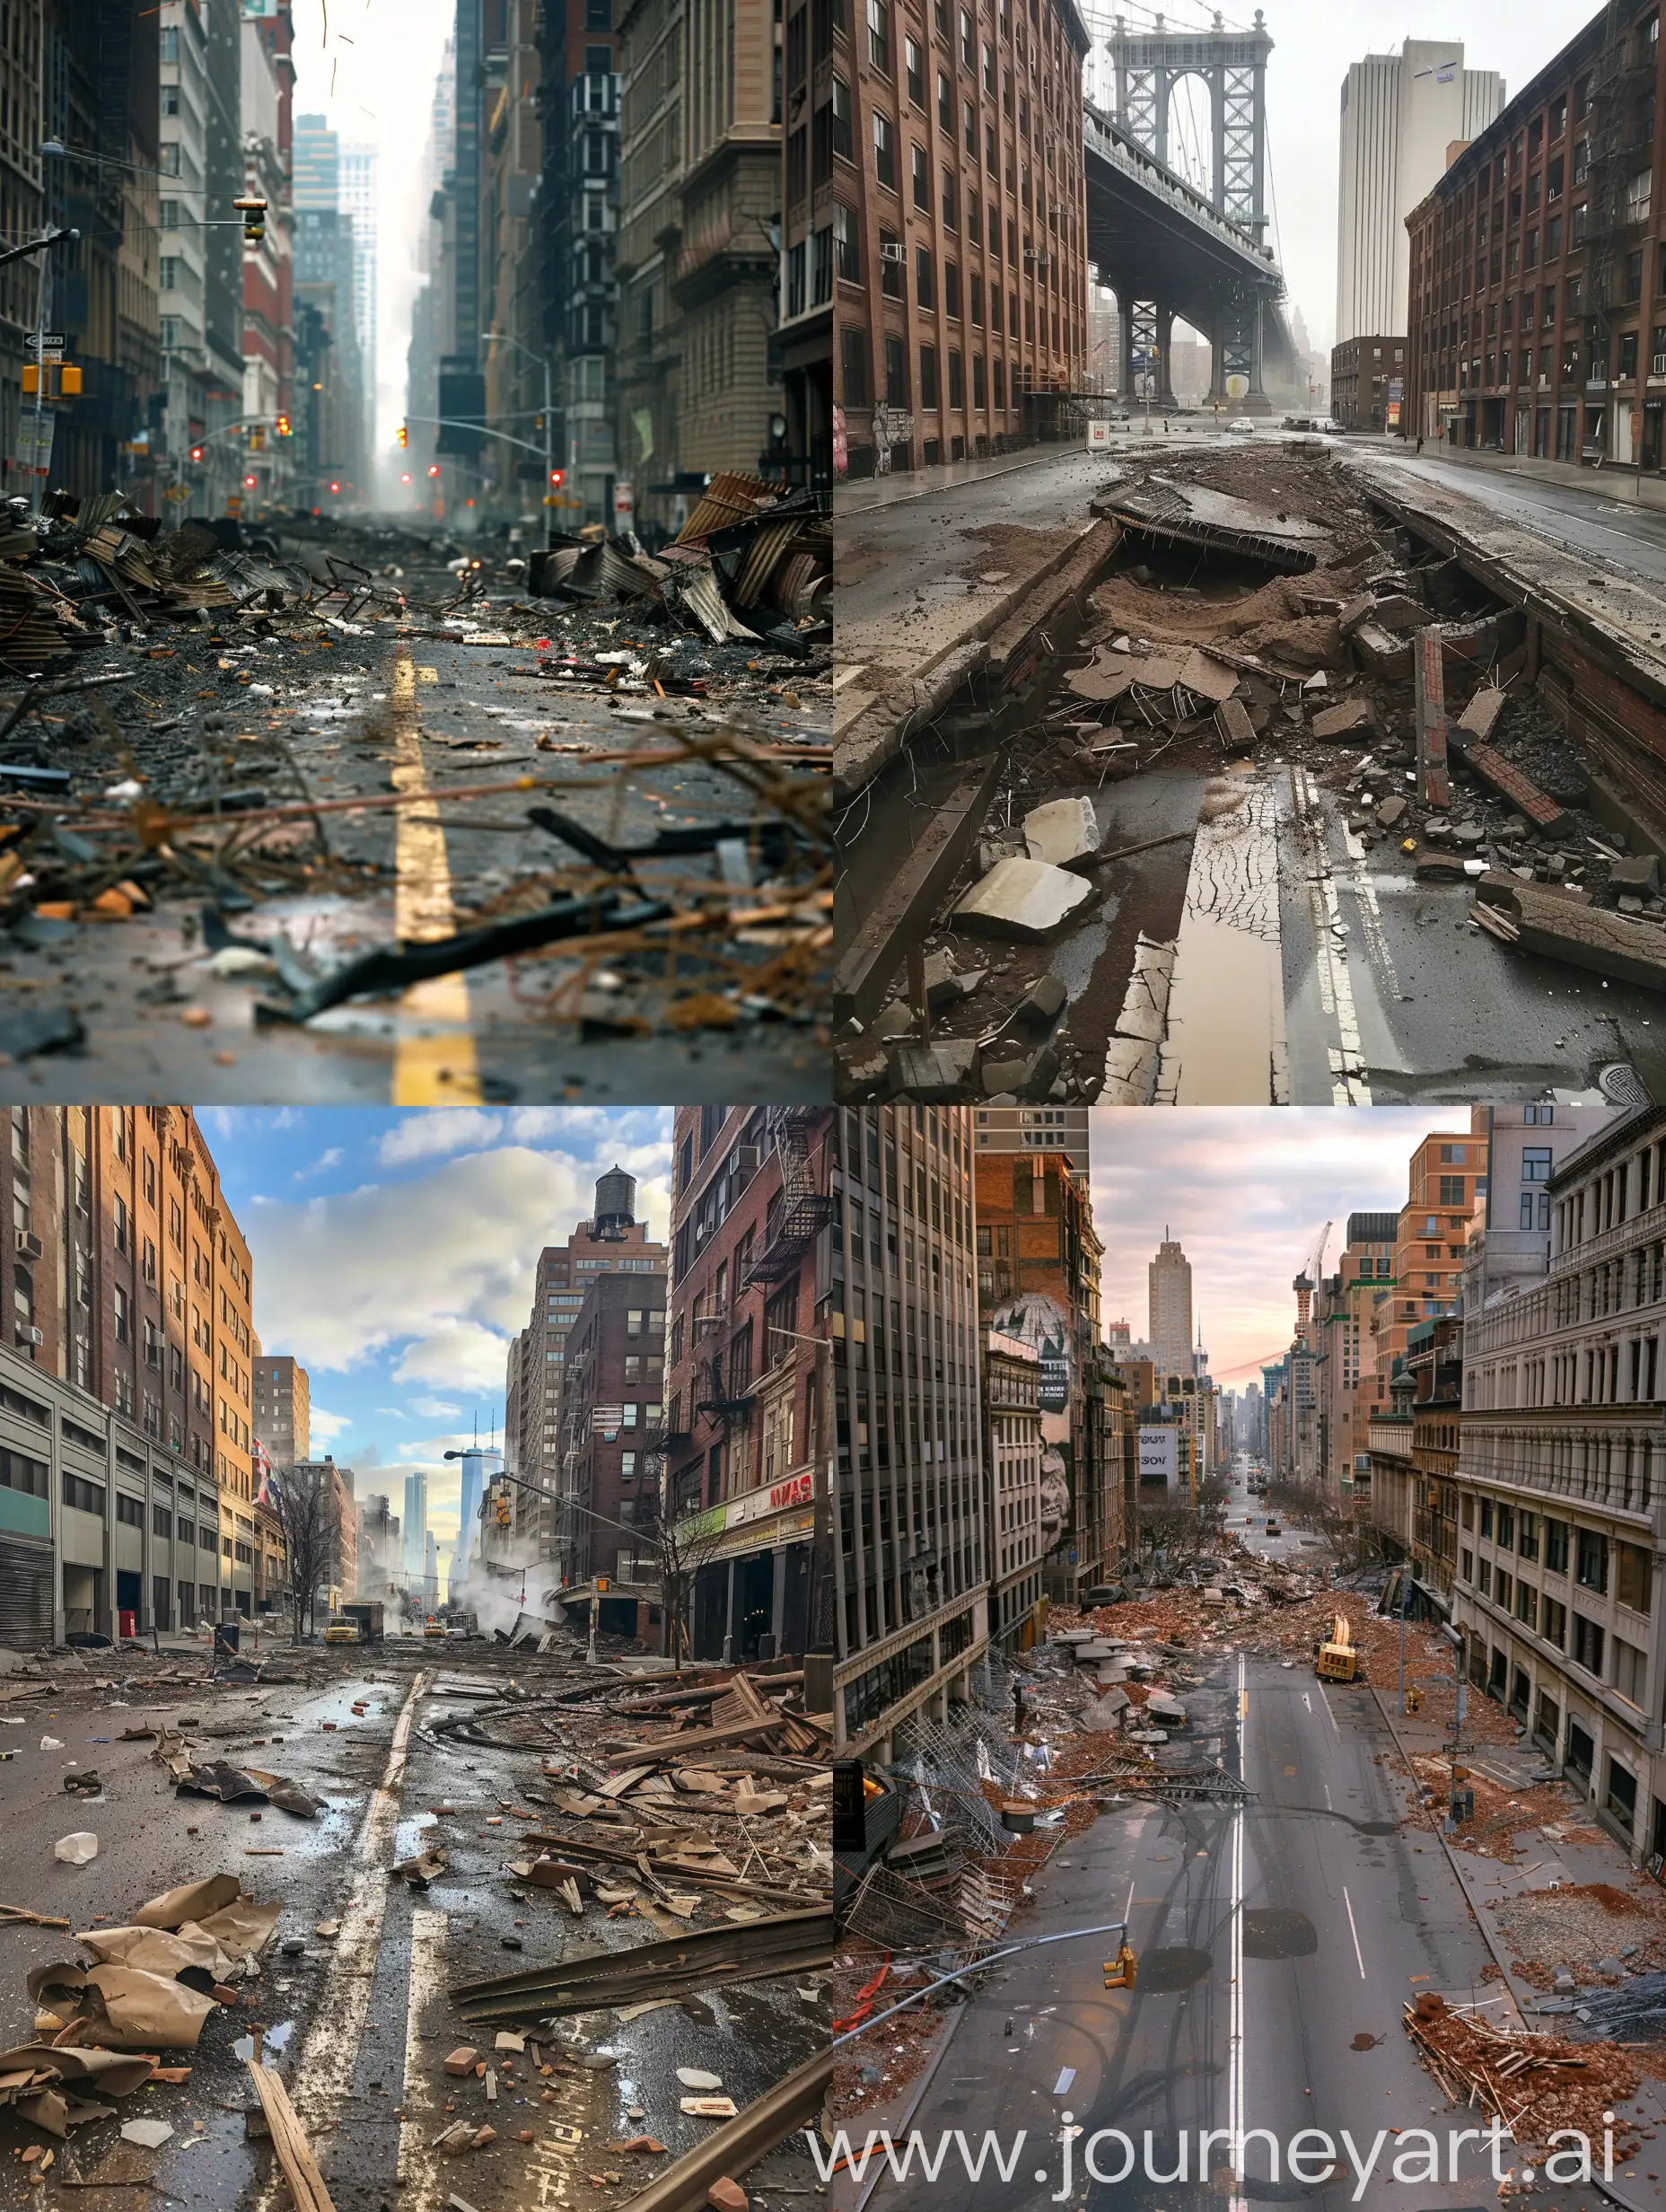 Apocalyptic-Scene-Devastated-New-York-City-Street-with-Ruined-Buildings